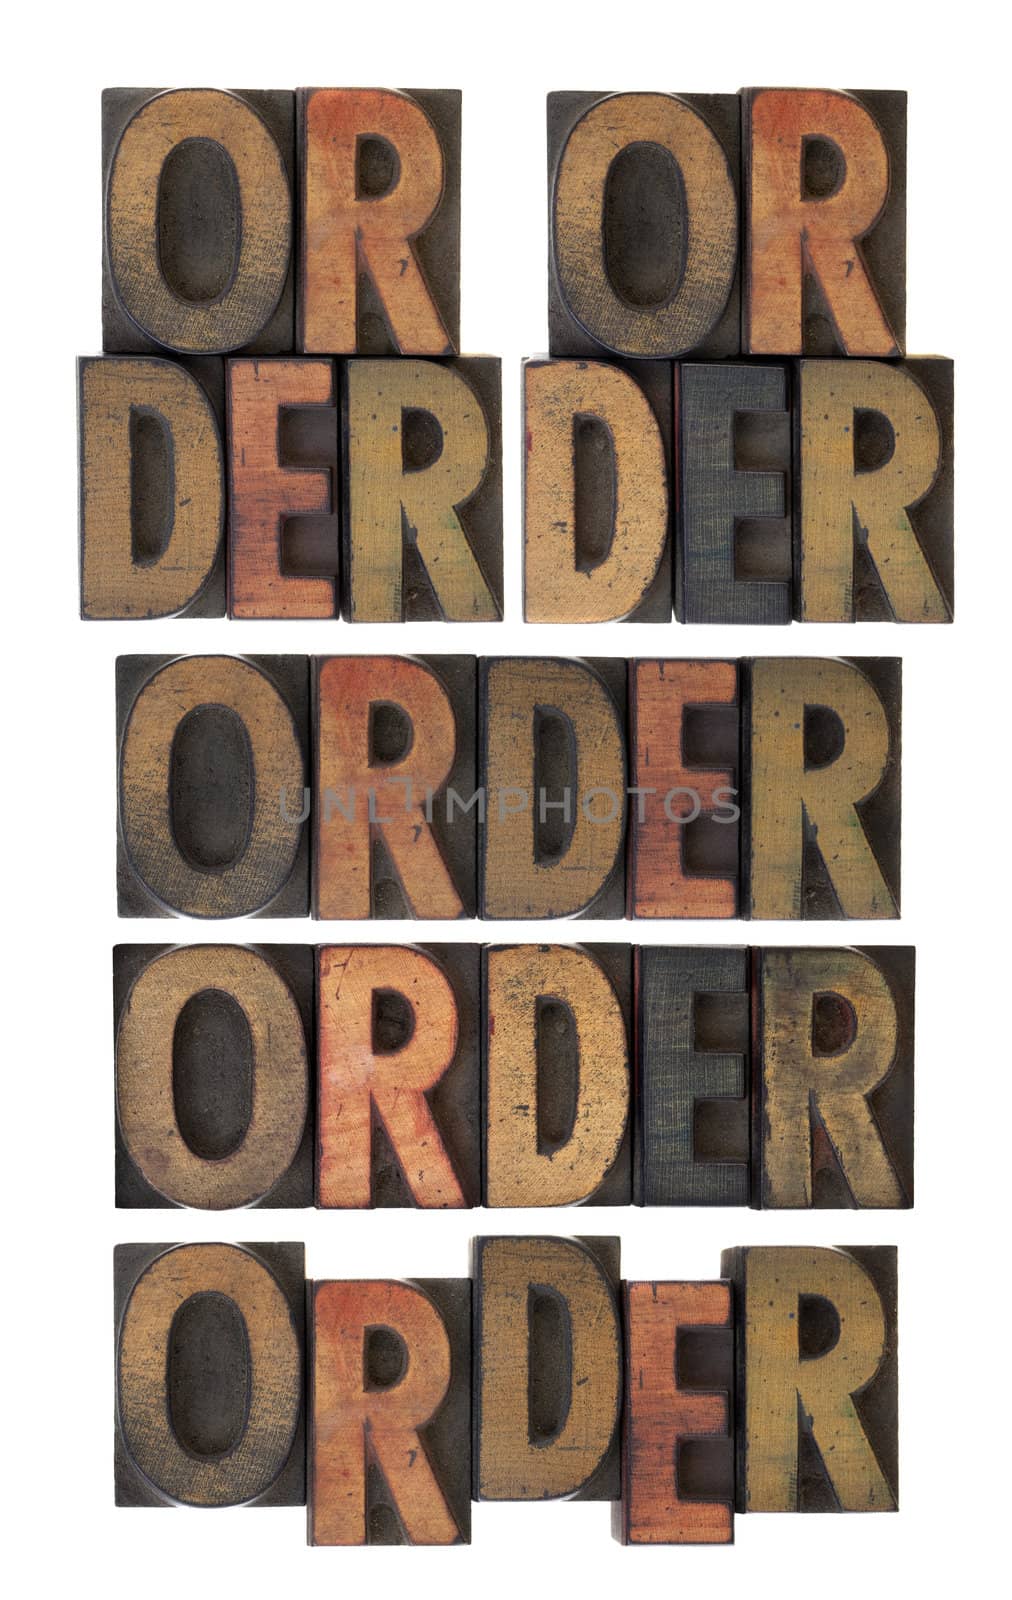 several layout version of word order, vintage letterpress wood type scratched and stained by ink, isolated on white